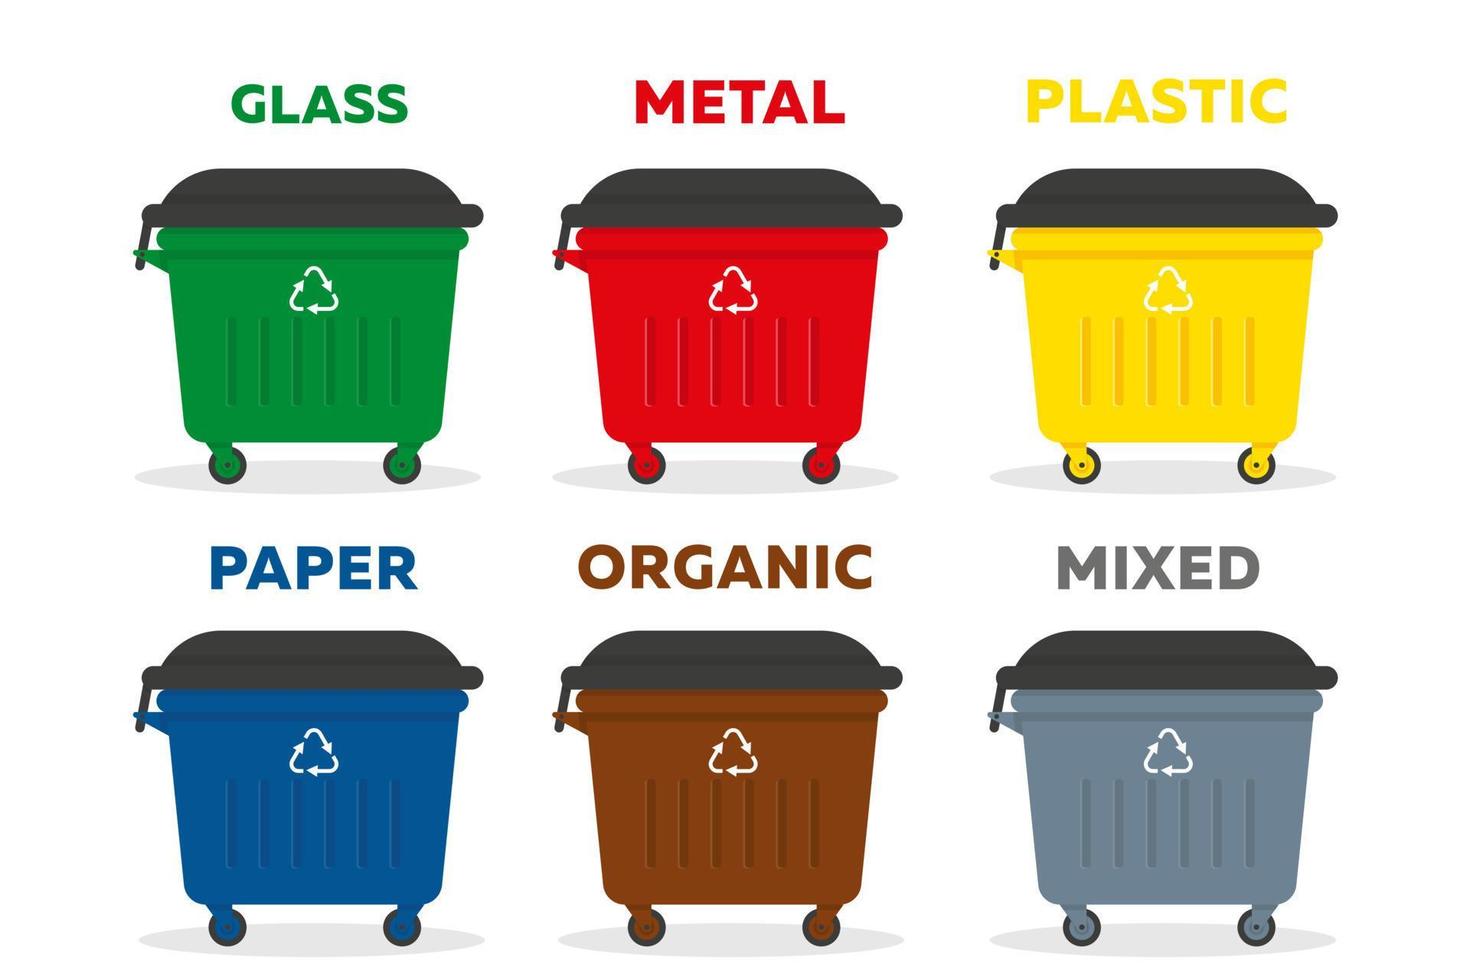 Dampsters for garbage of different types. Waste sorting recycling concept. Vector illustration.